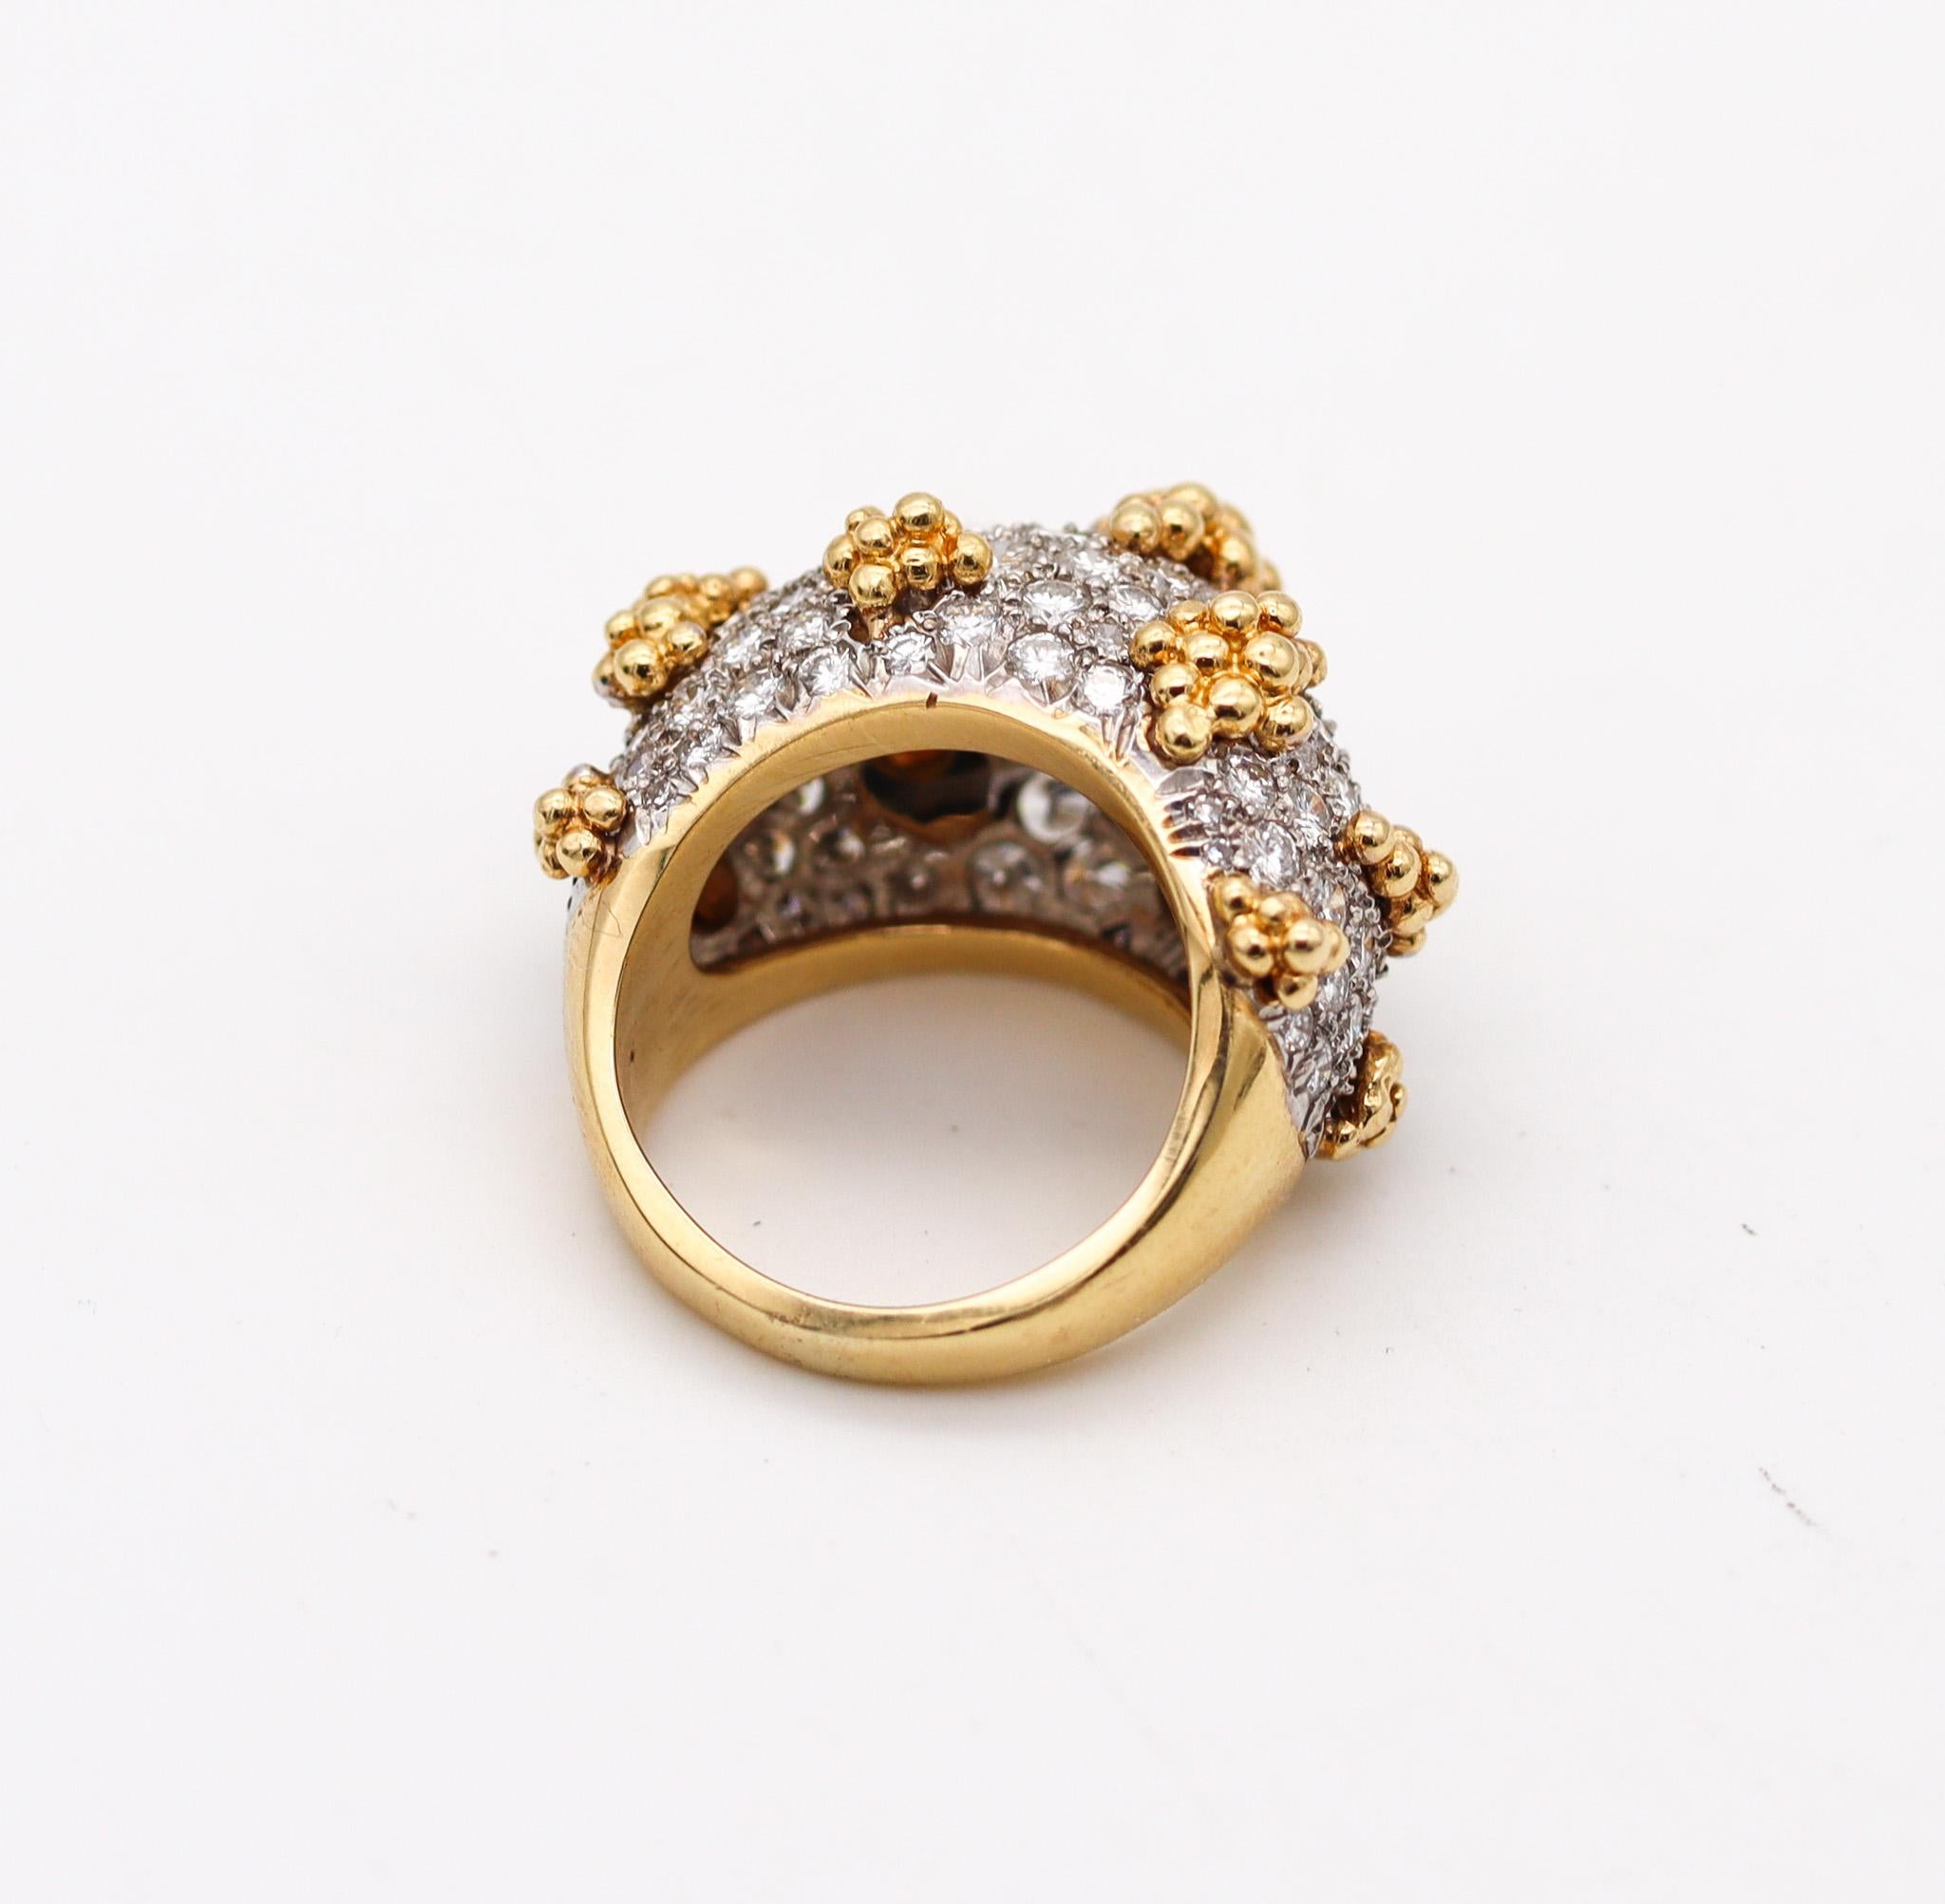 Brilliant Cut Italian Mid Century Bombe Cocktail Ring 18Kt Gold Platinum With 5.30 Ctw Diamond For Sale